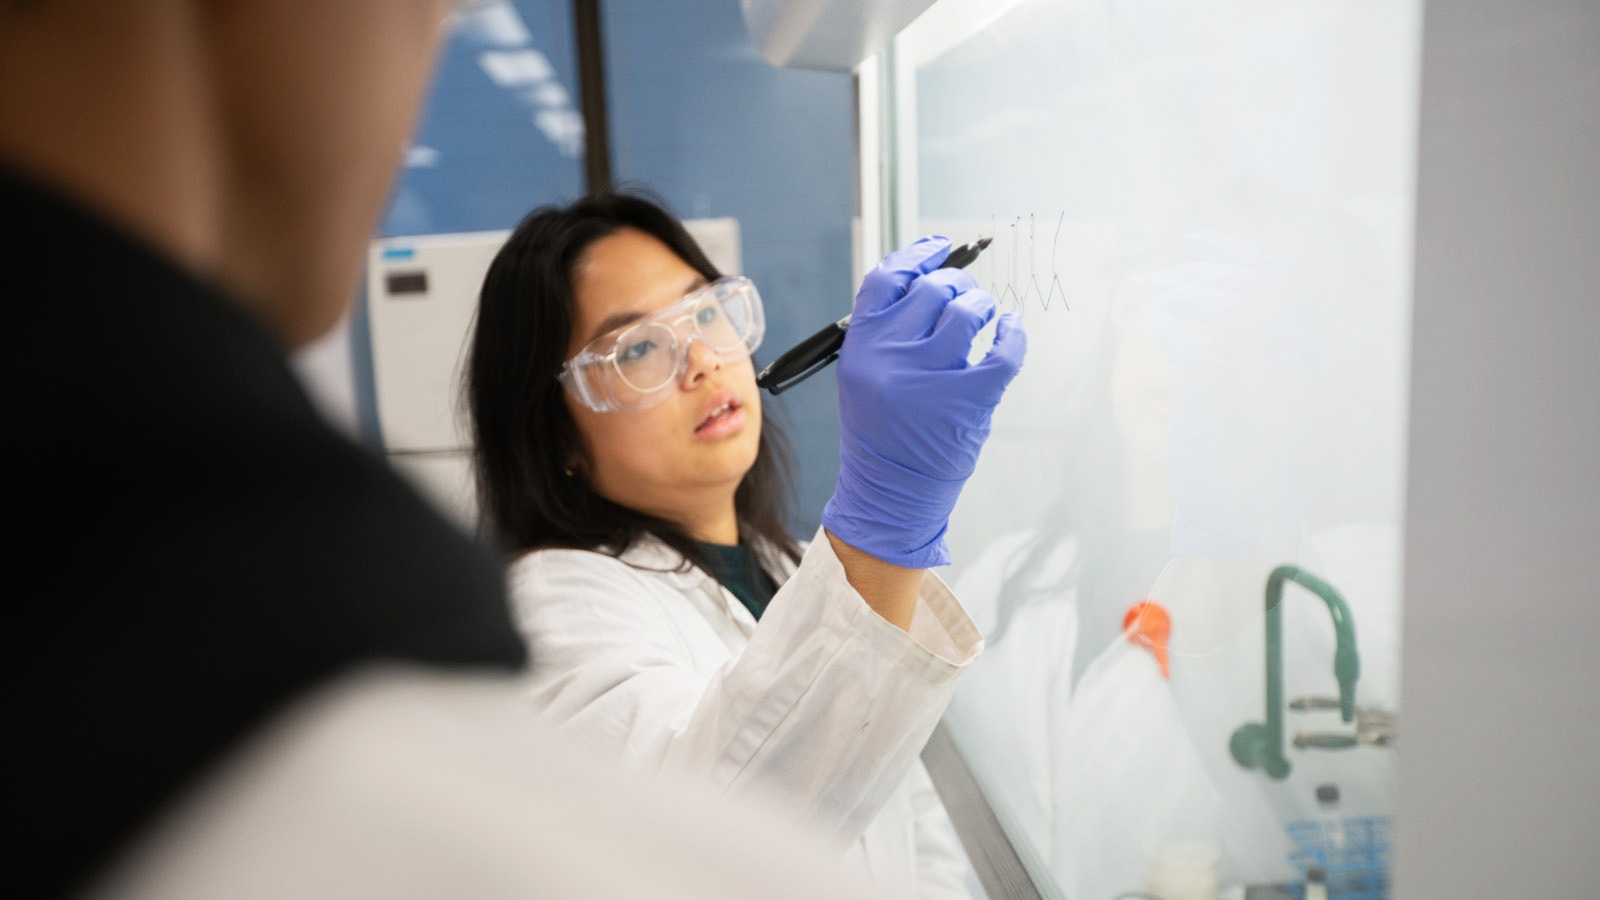 An image of a woman in a lab writing something on a whiteboard. 